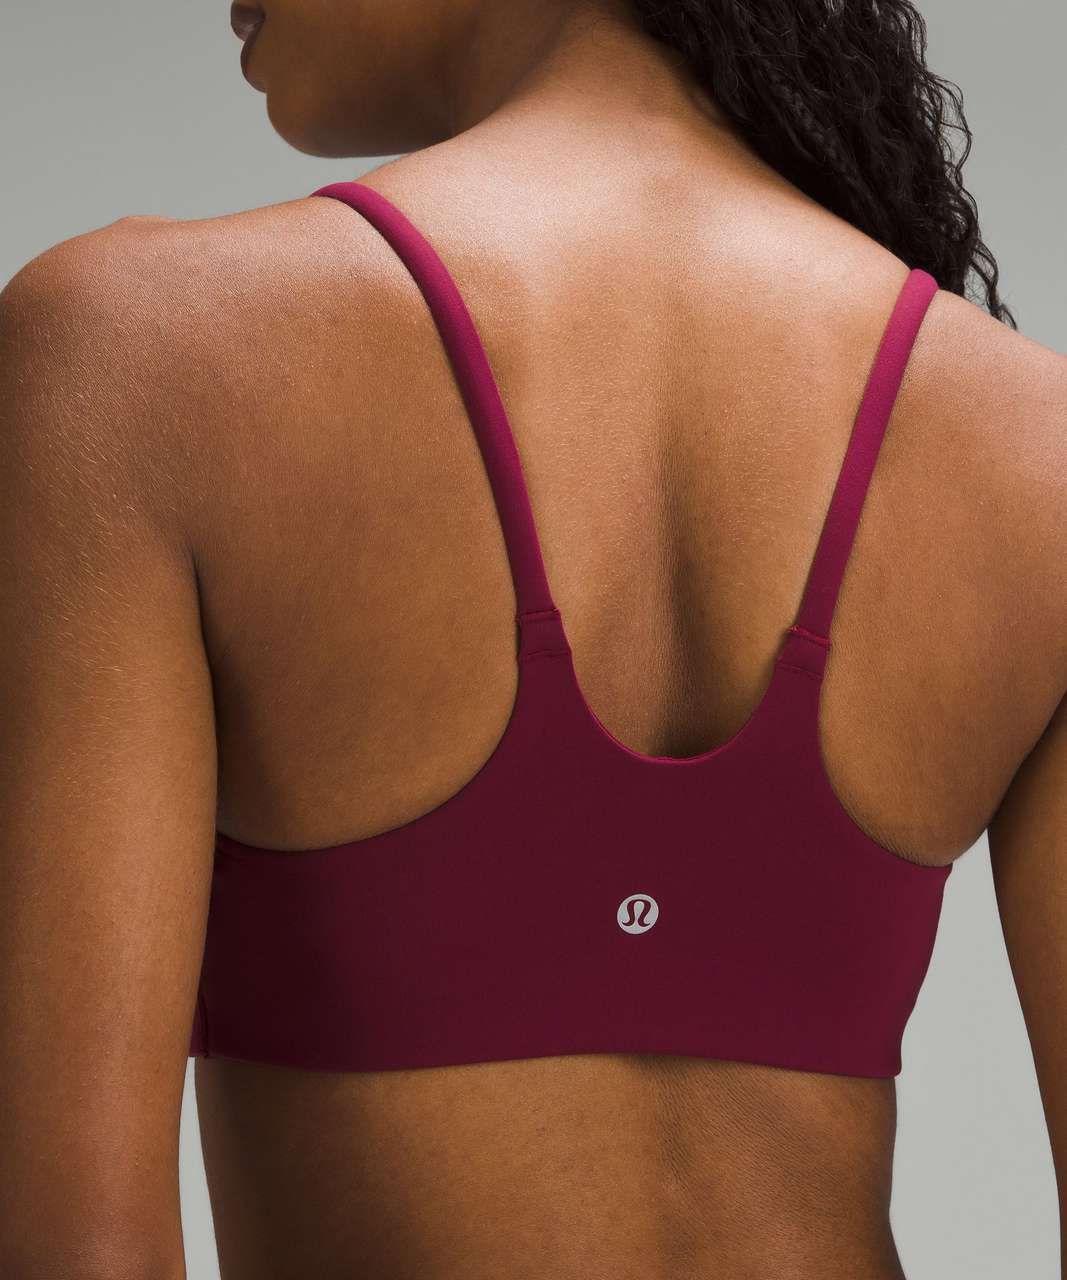 Lululemon Wunder Train Strappy Racer Bra *Light Support, C/D Cup - Deep Luxe